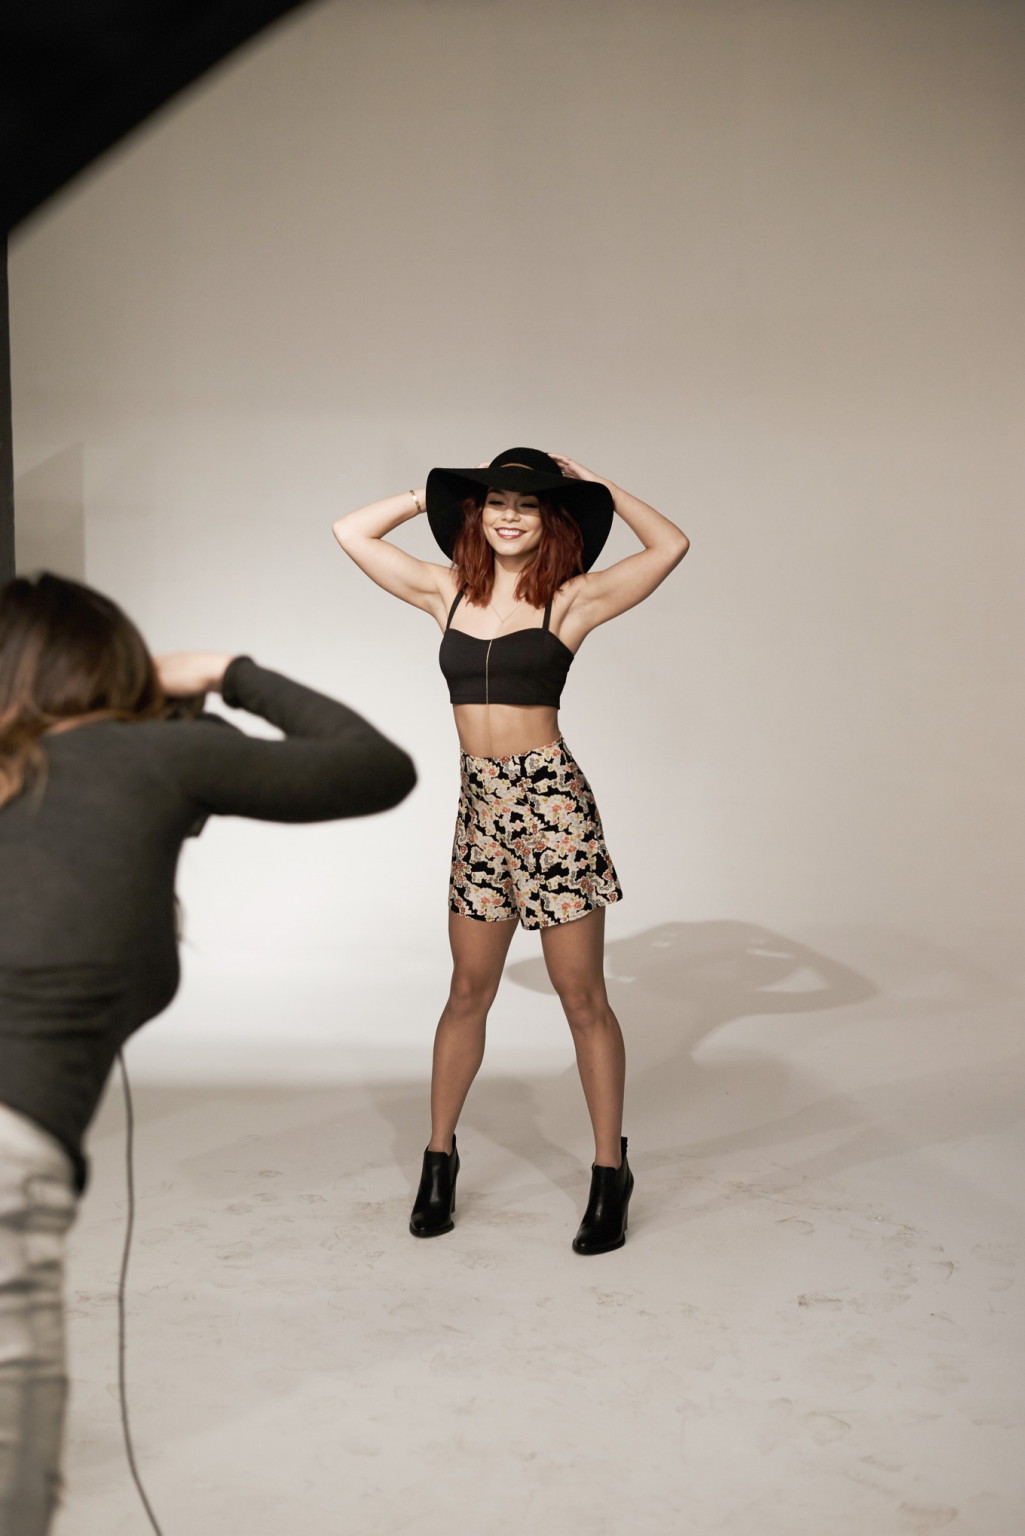 Vanessa Hudgens wearing skimpy undies and outfit for Bongo Spring 2015 Campaign  #75174001